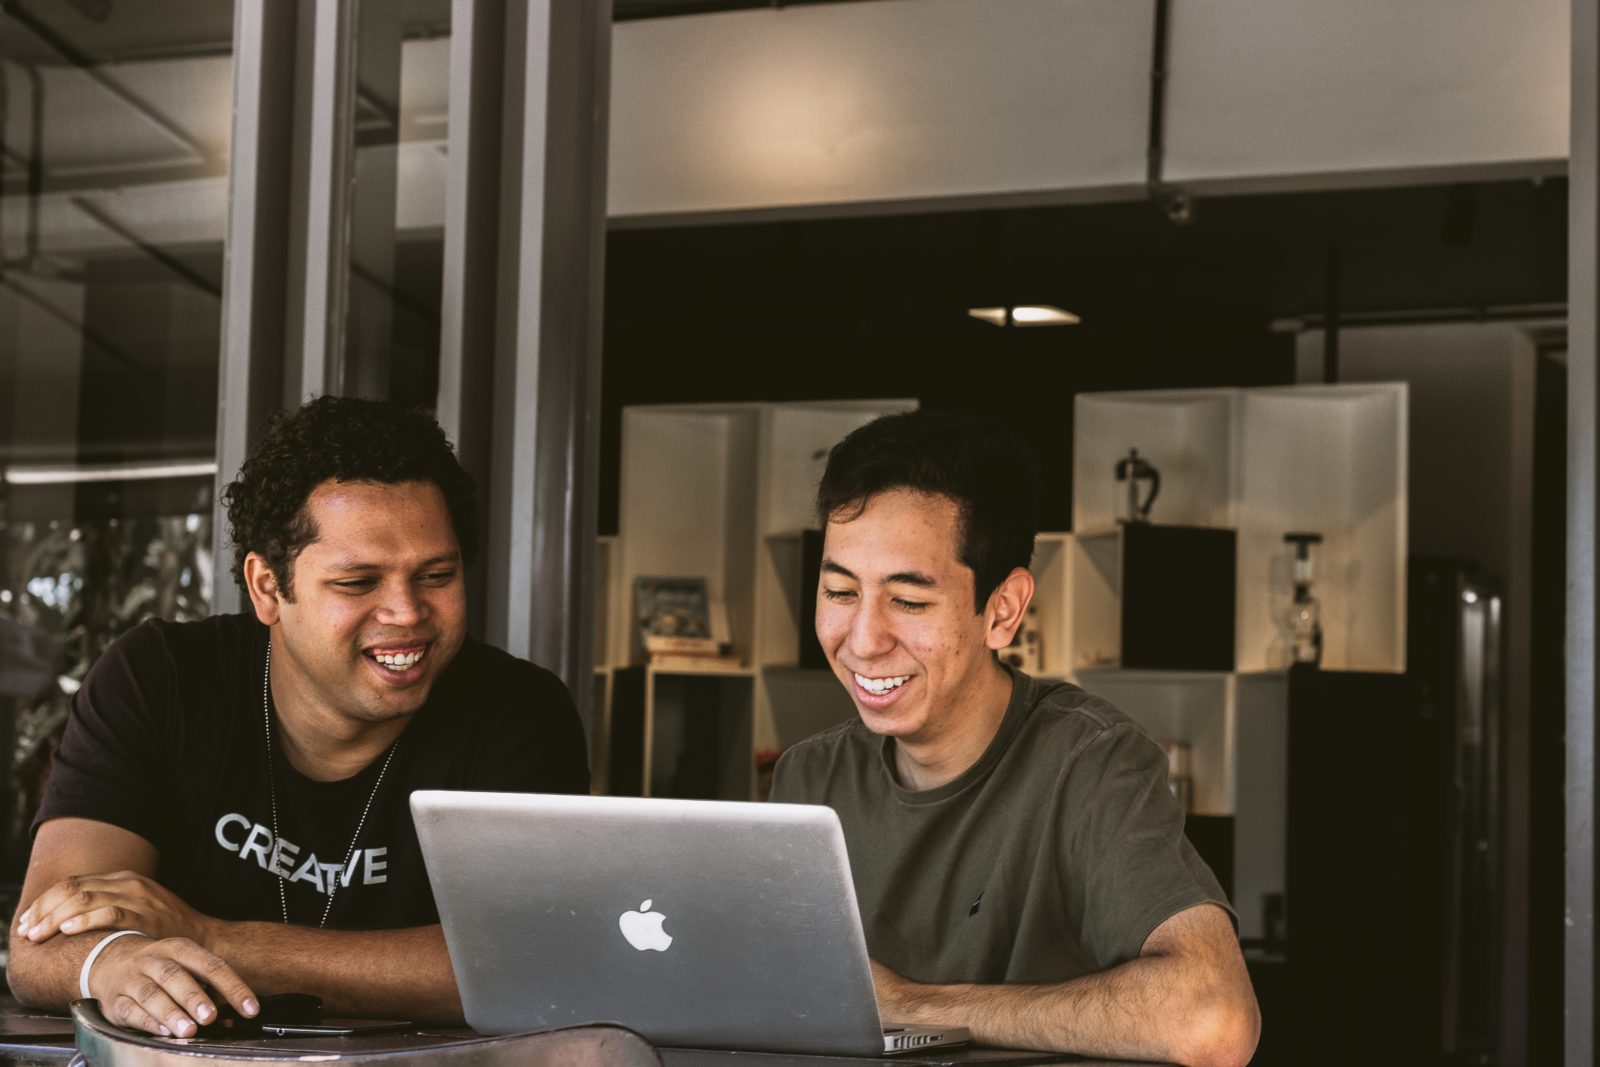 In this image, two smiling, relaxed men work together on a Macbook